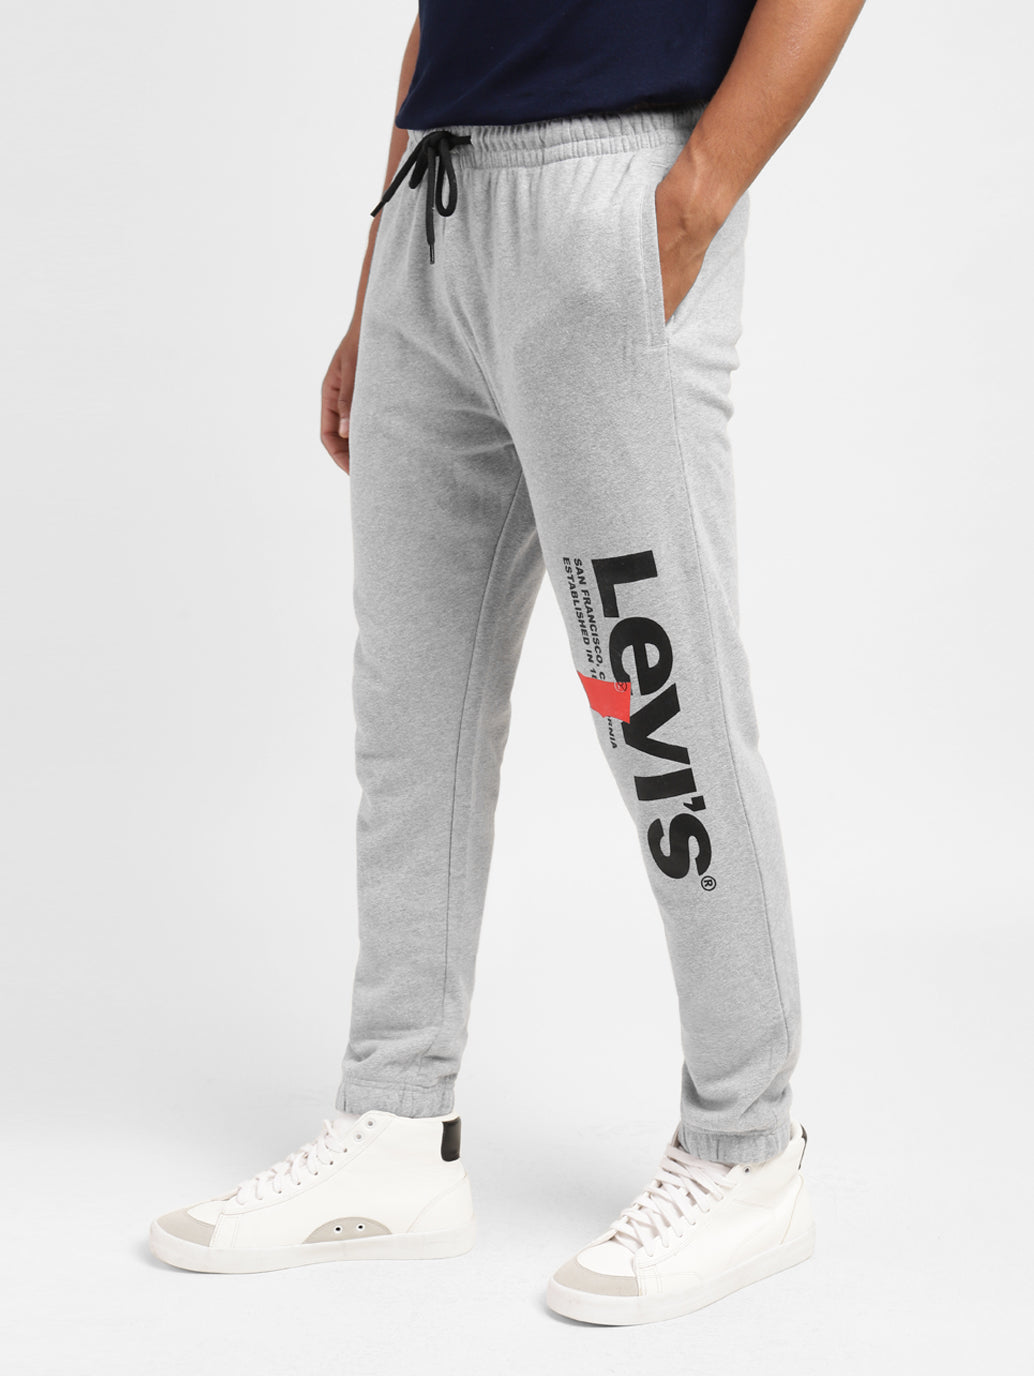 nike grey tapered joggers,cheap - OFF 58% 